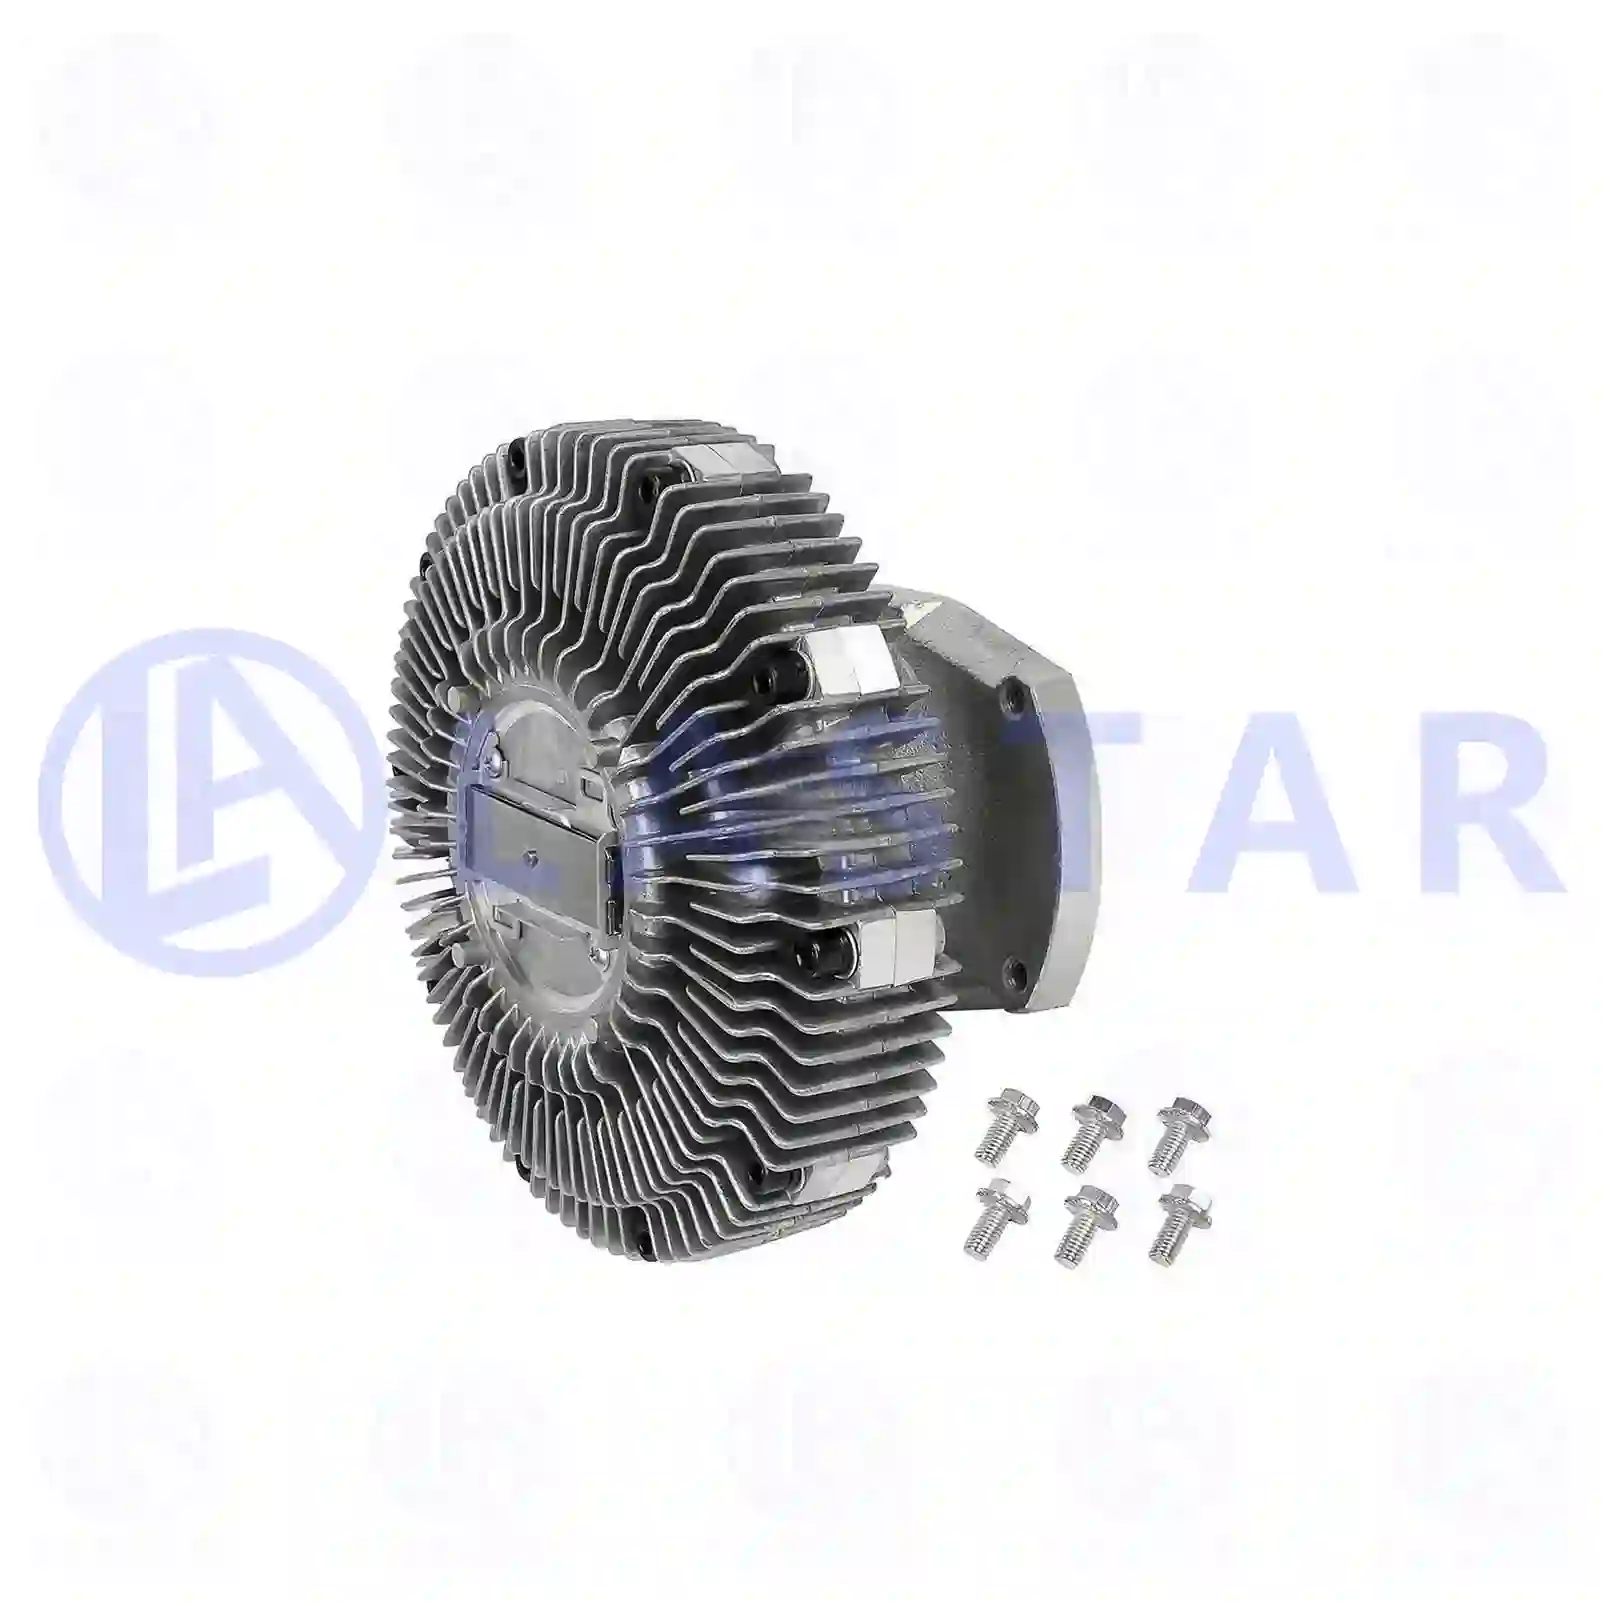 Fan clutch, 77707509, 10571088, 1480769, 374706, 571088, , , ||  77707509 Lastar Spare Part | Truck Spare Parts, Auotomotive Spare Parts Fan clutch, 77707509, 10571088, 1480769, 374706, 571088, , , ||  77707509 Lastar Spare Part | Truck Spare Parts, Auotomotive Spare Parts